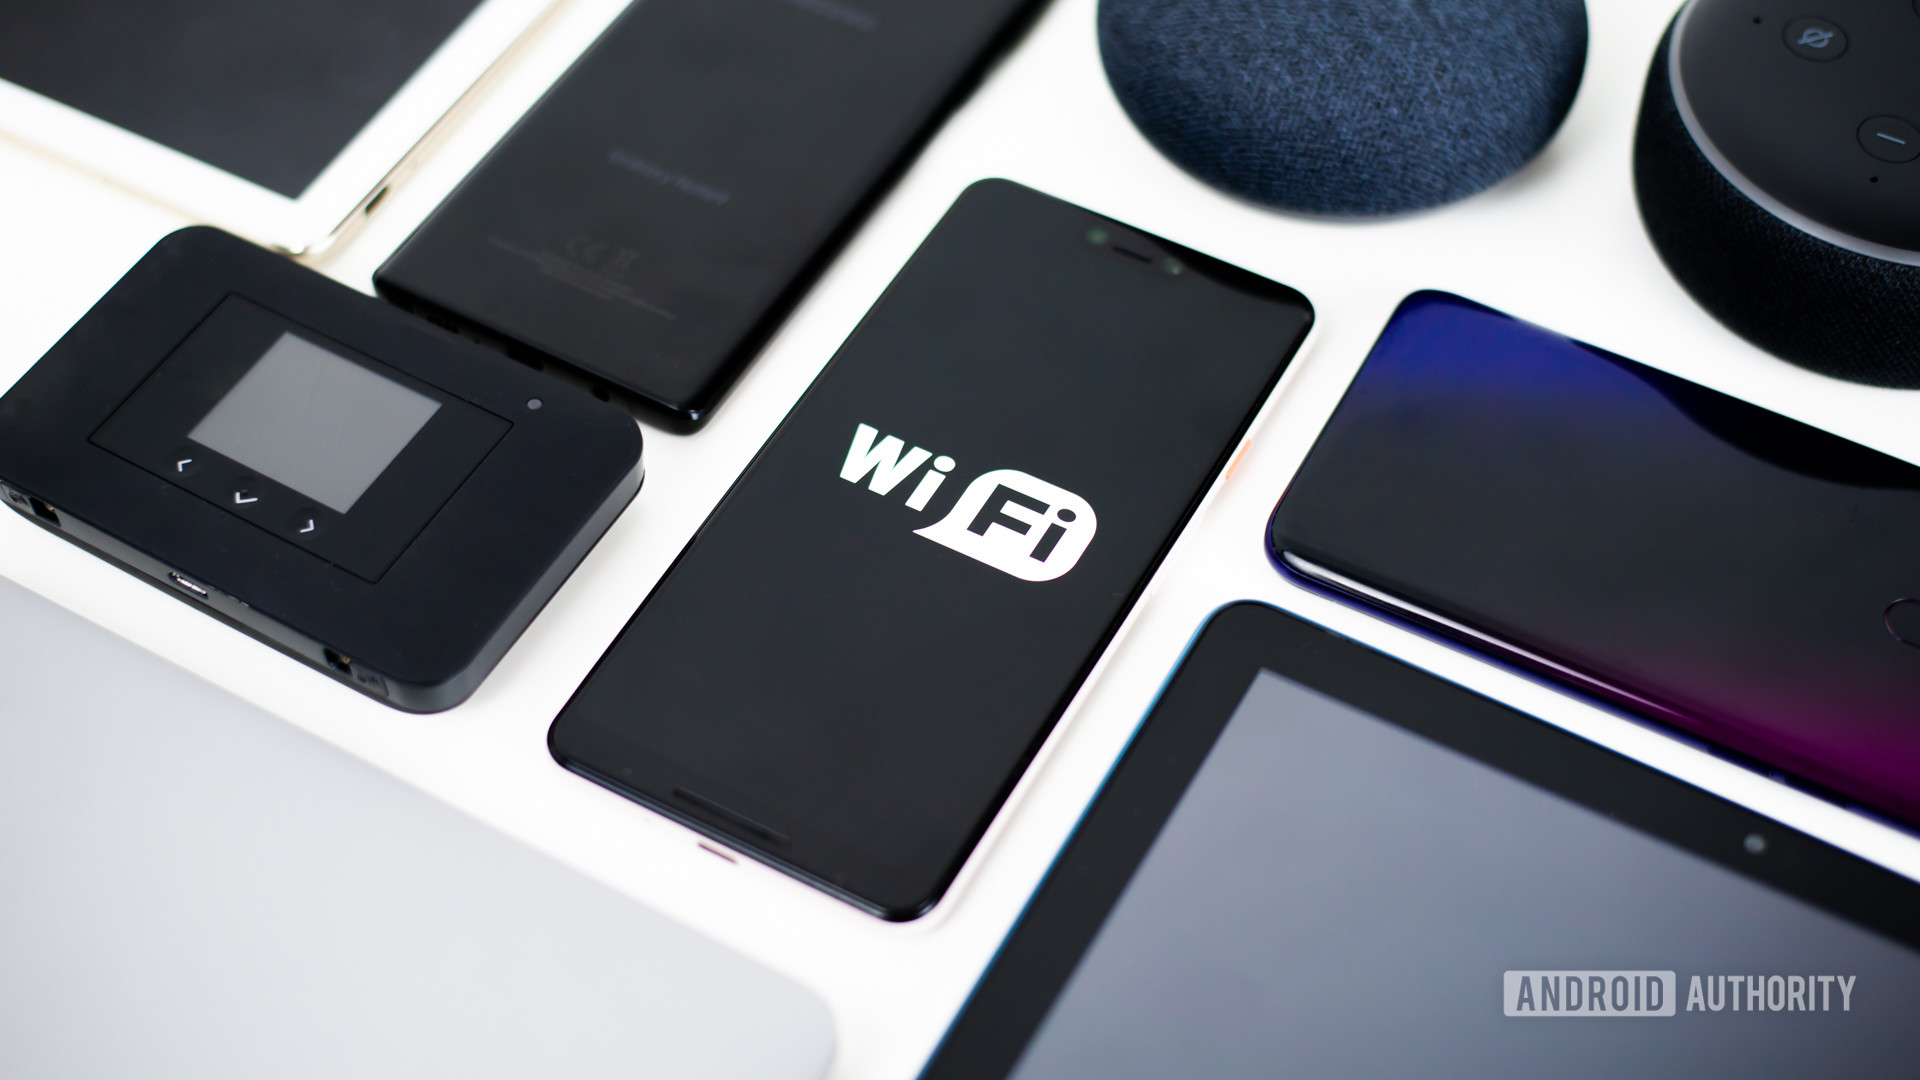 Wi Fi devices stock photo 1 - What to do when phone won't connect to Wi-Fi